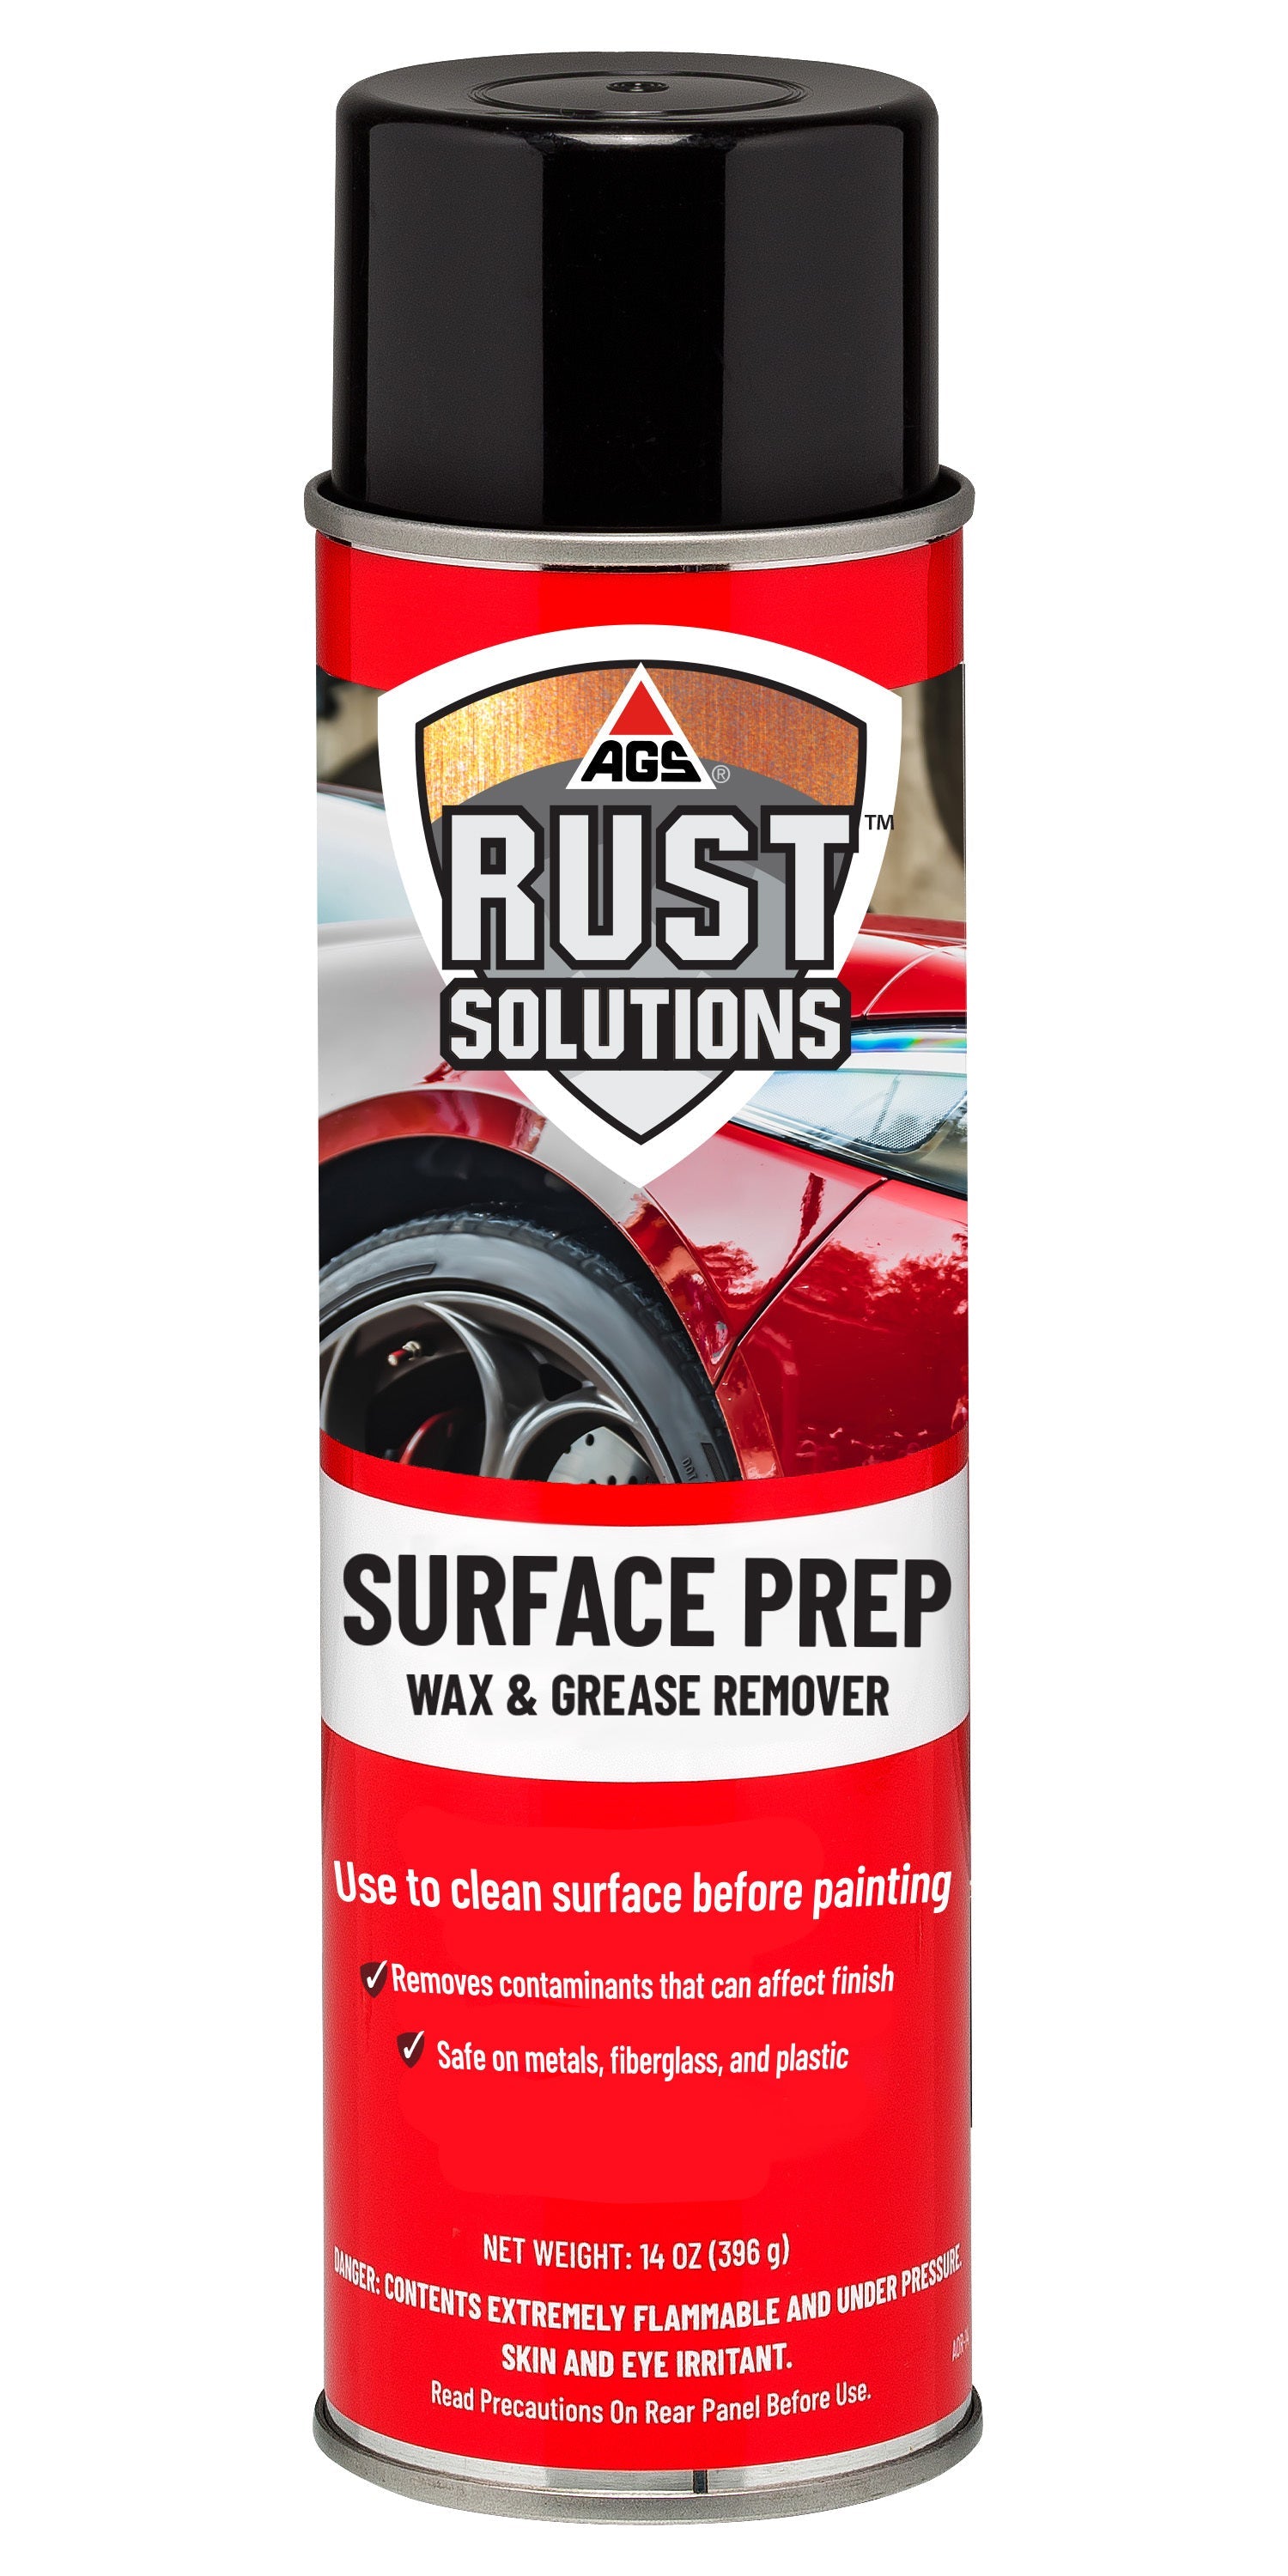 WAX AND GREASE REMOVER SPC 809 1L P